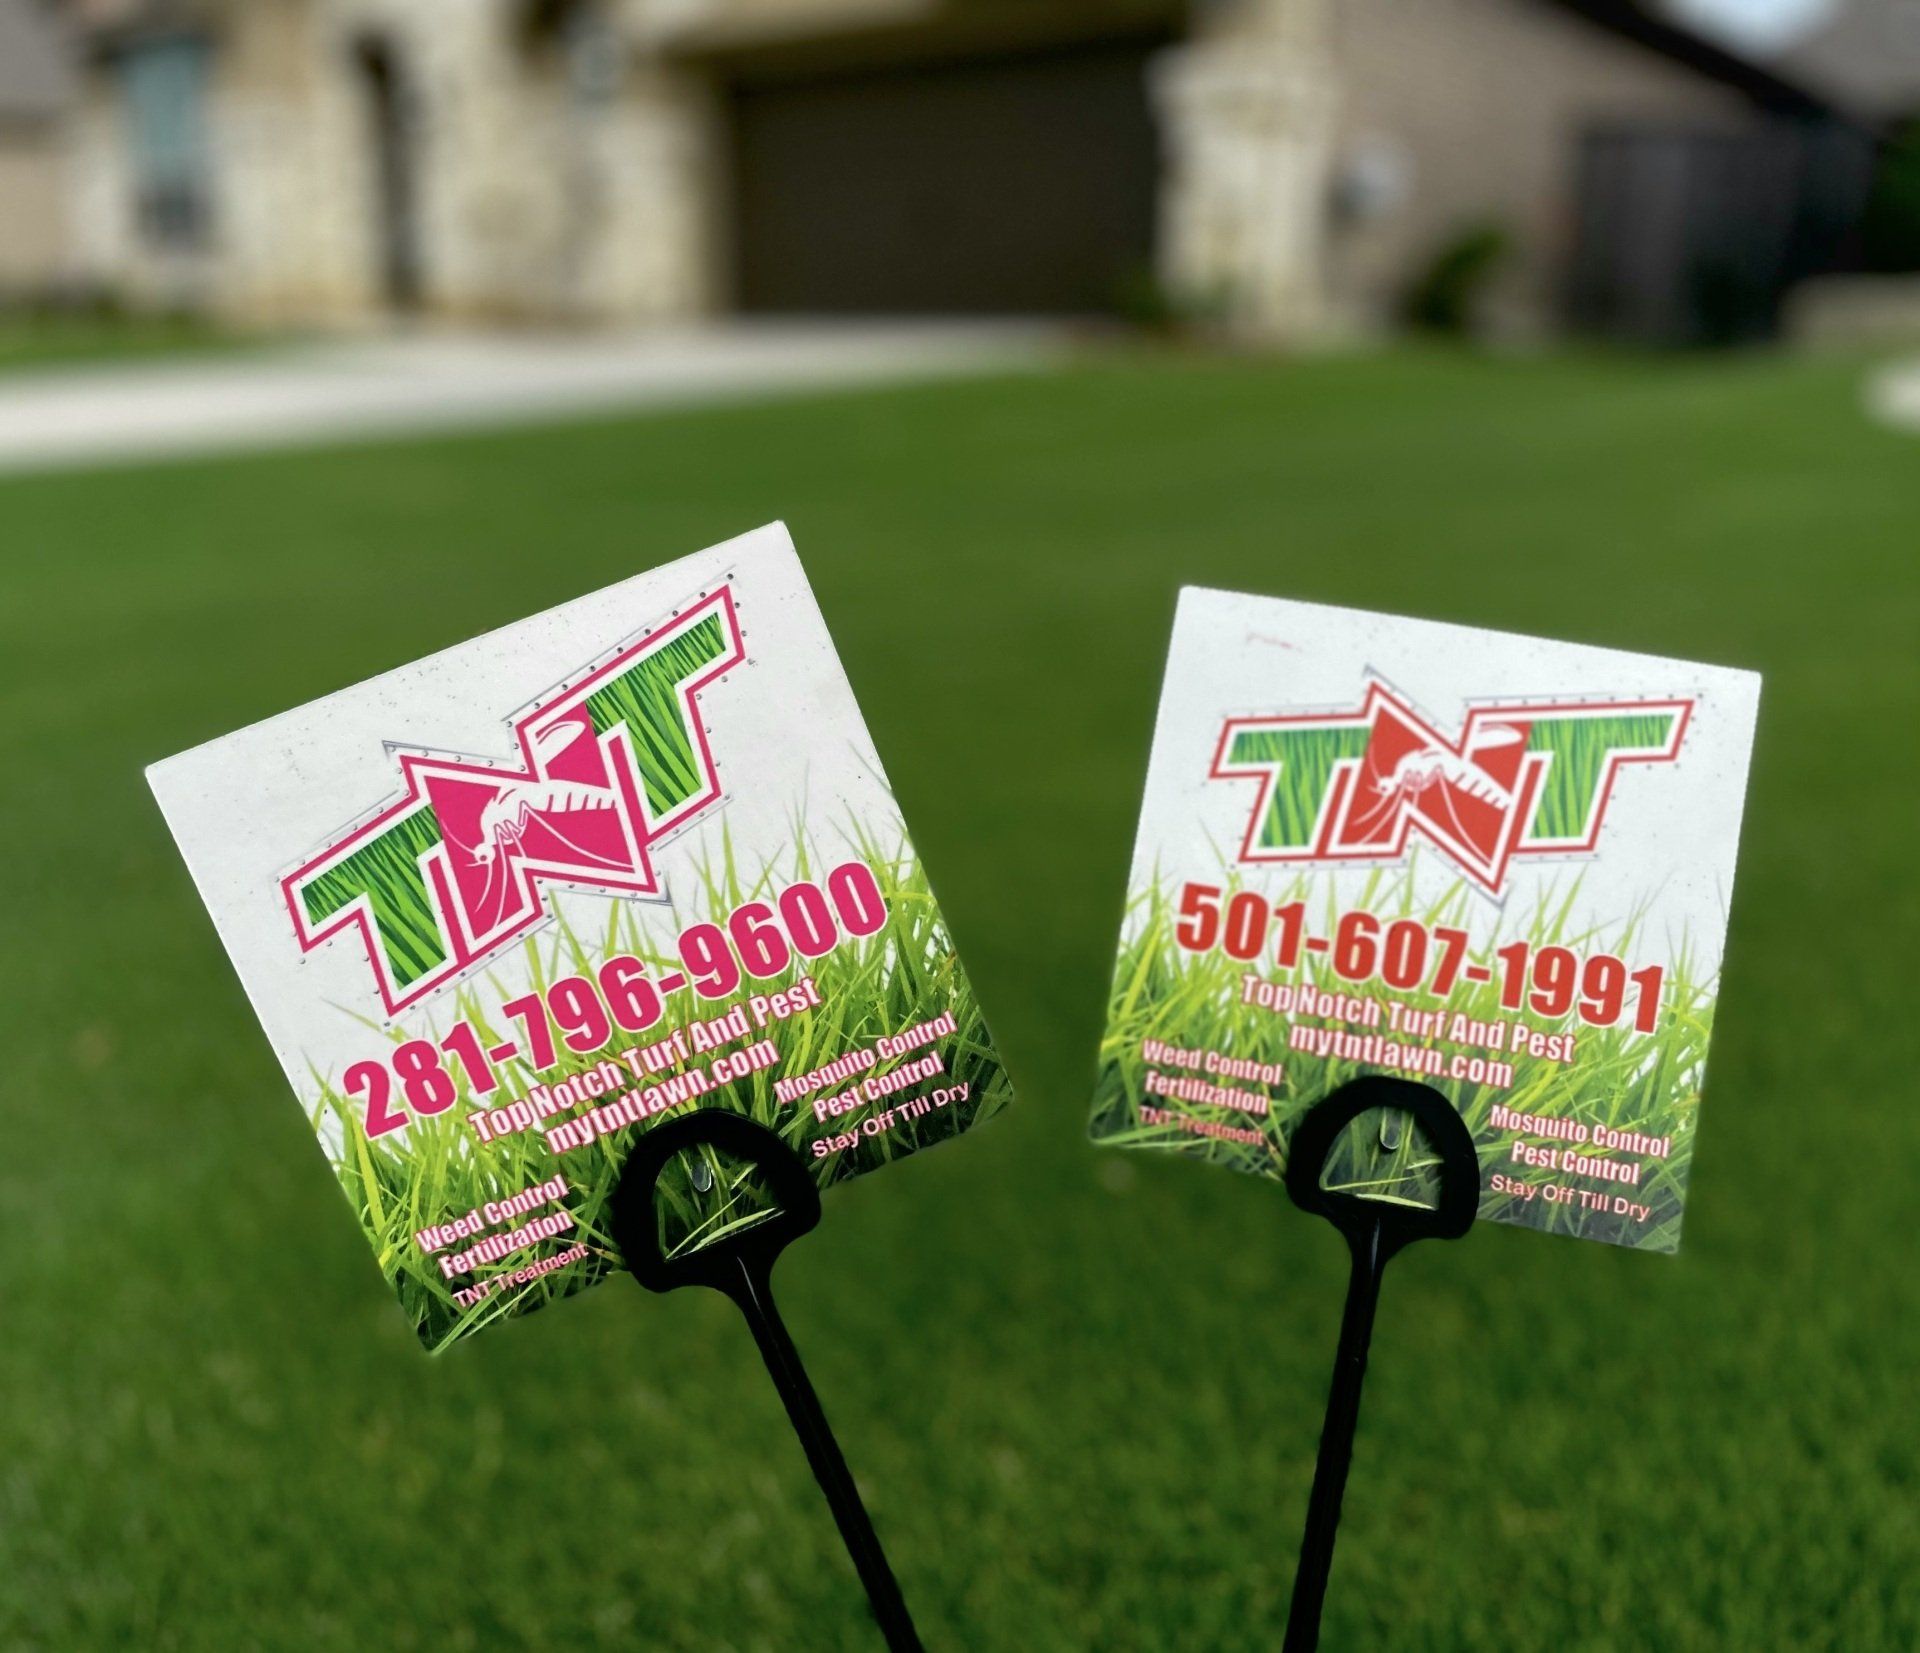 image representing turf, lawn and pest services central arkansas